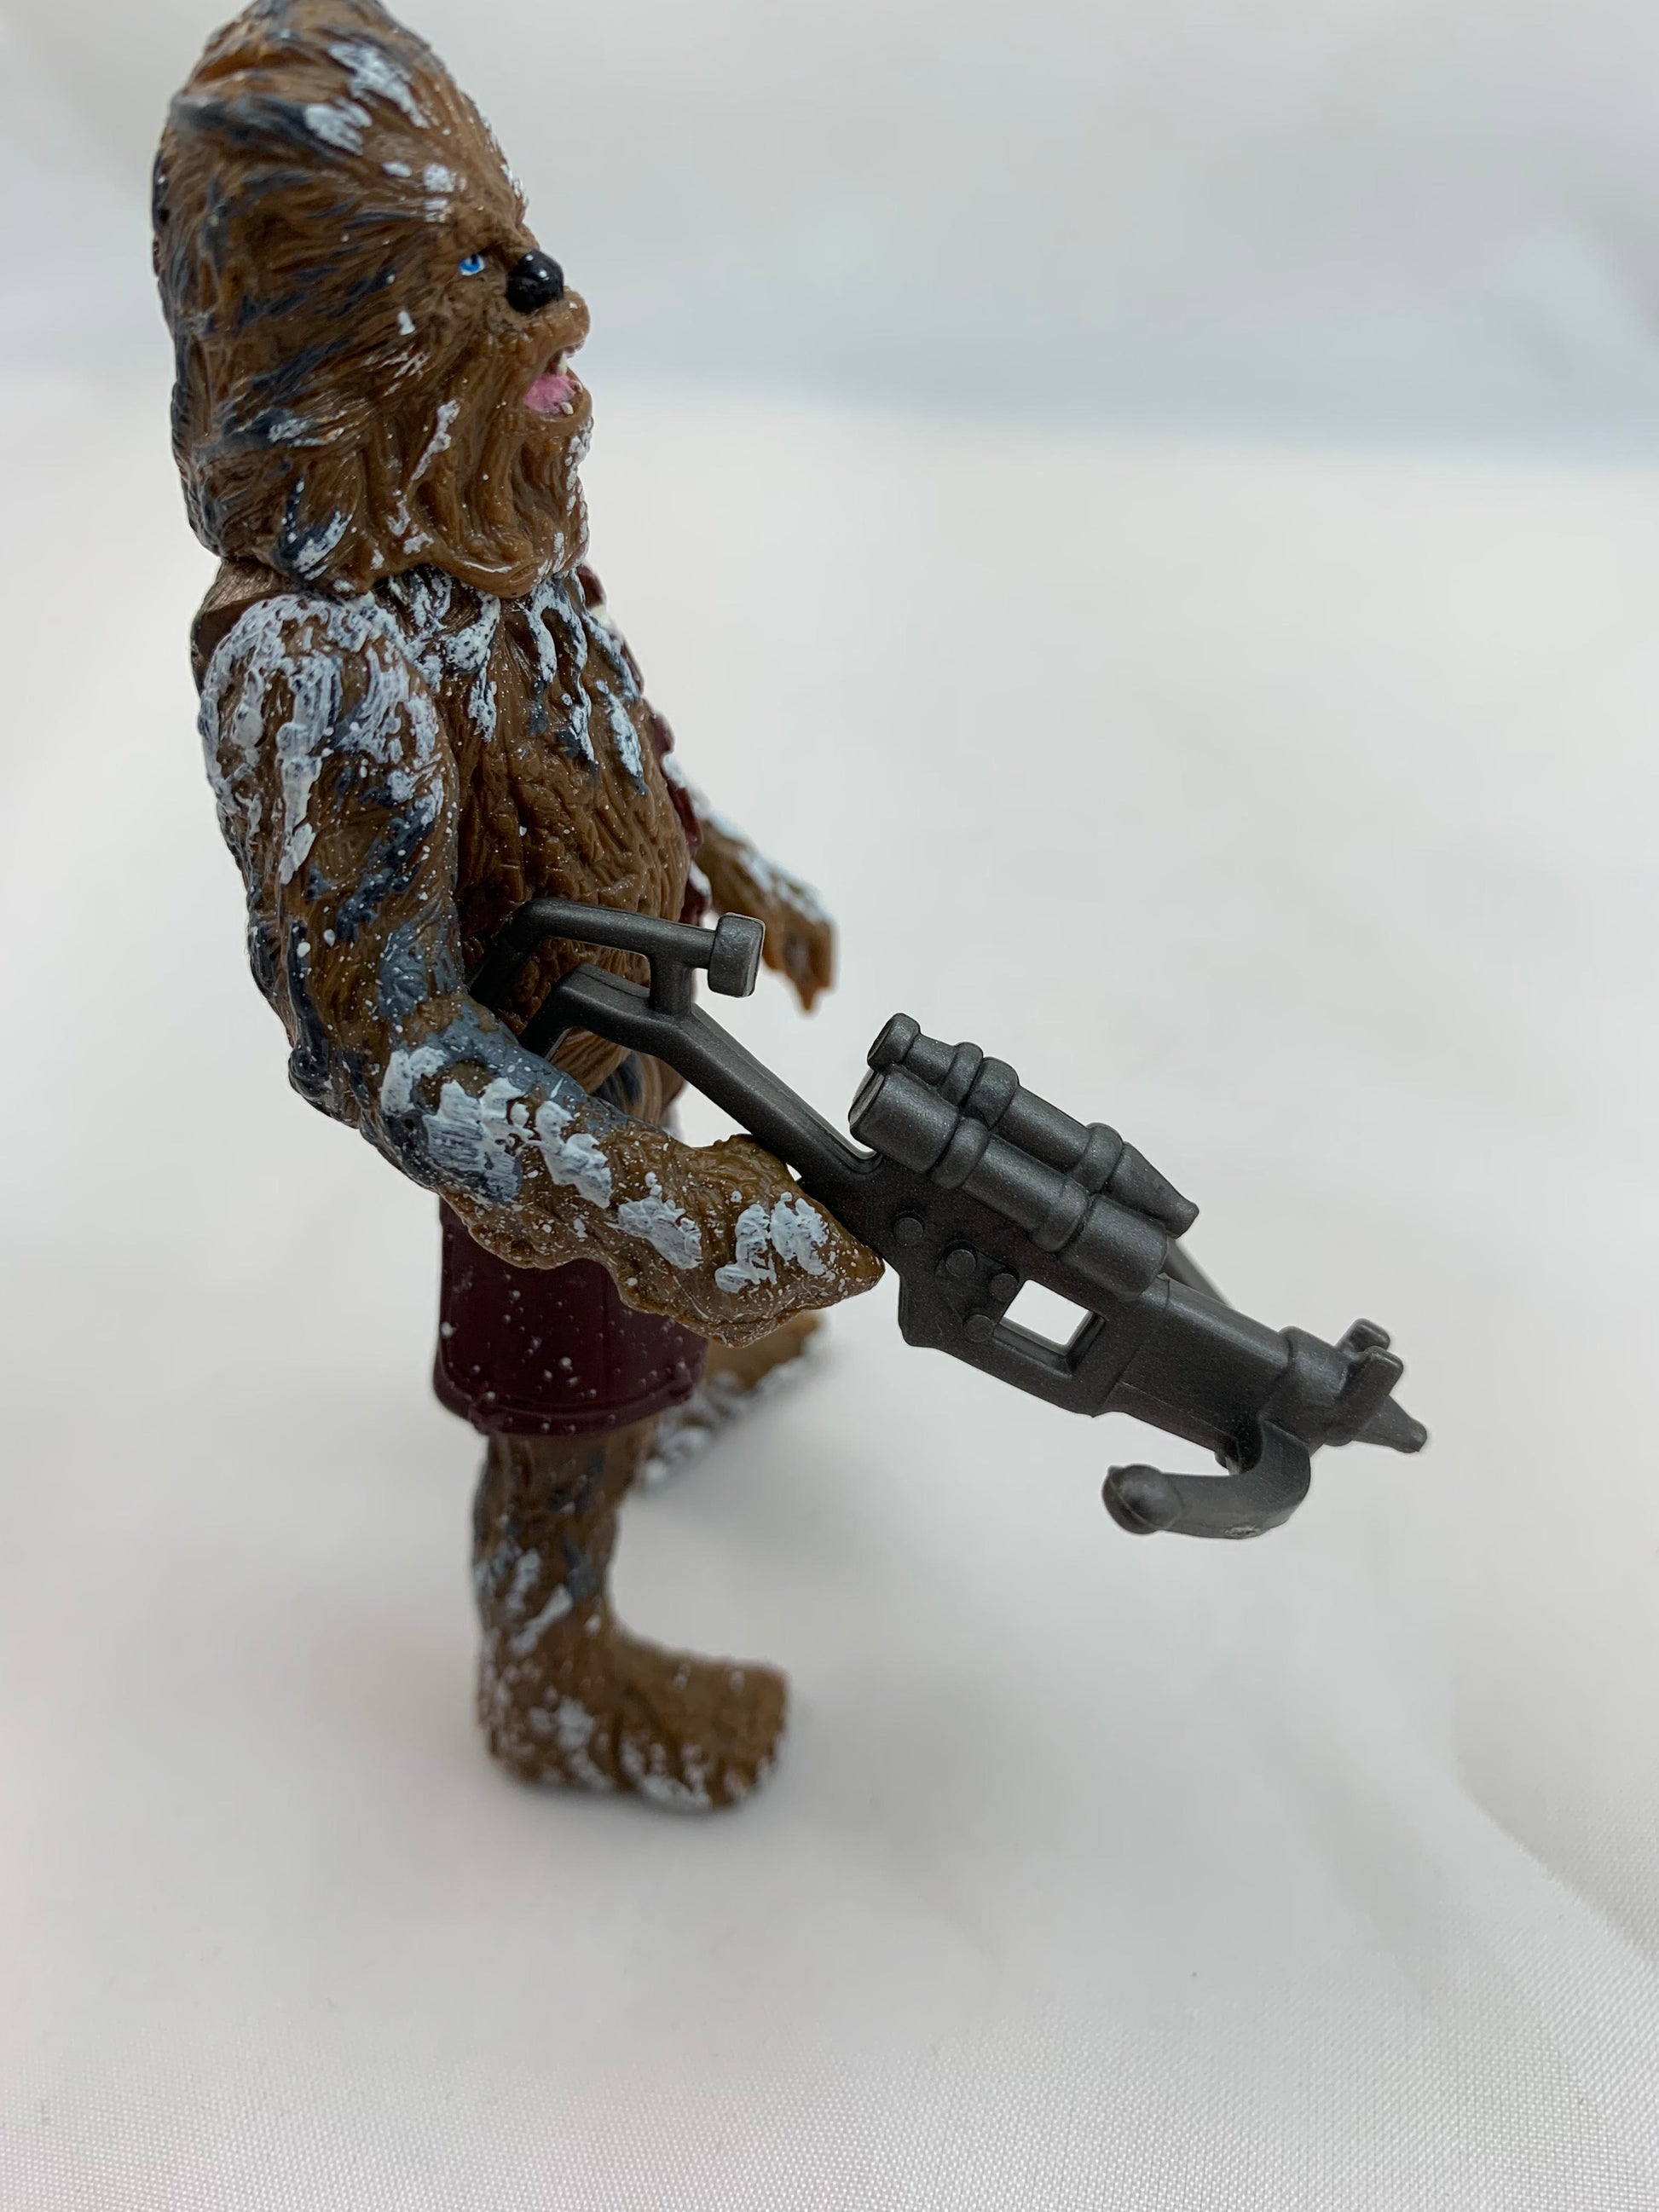 Kenner Vintage Star Wars: POTF Power of the Force 2 Chewbacca Hoth with bowcaster ( glued) COO LFL 1998 China - Loose Action Figure